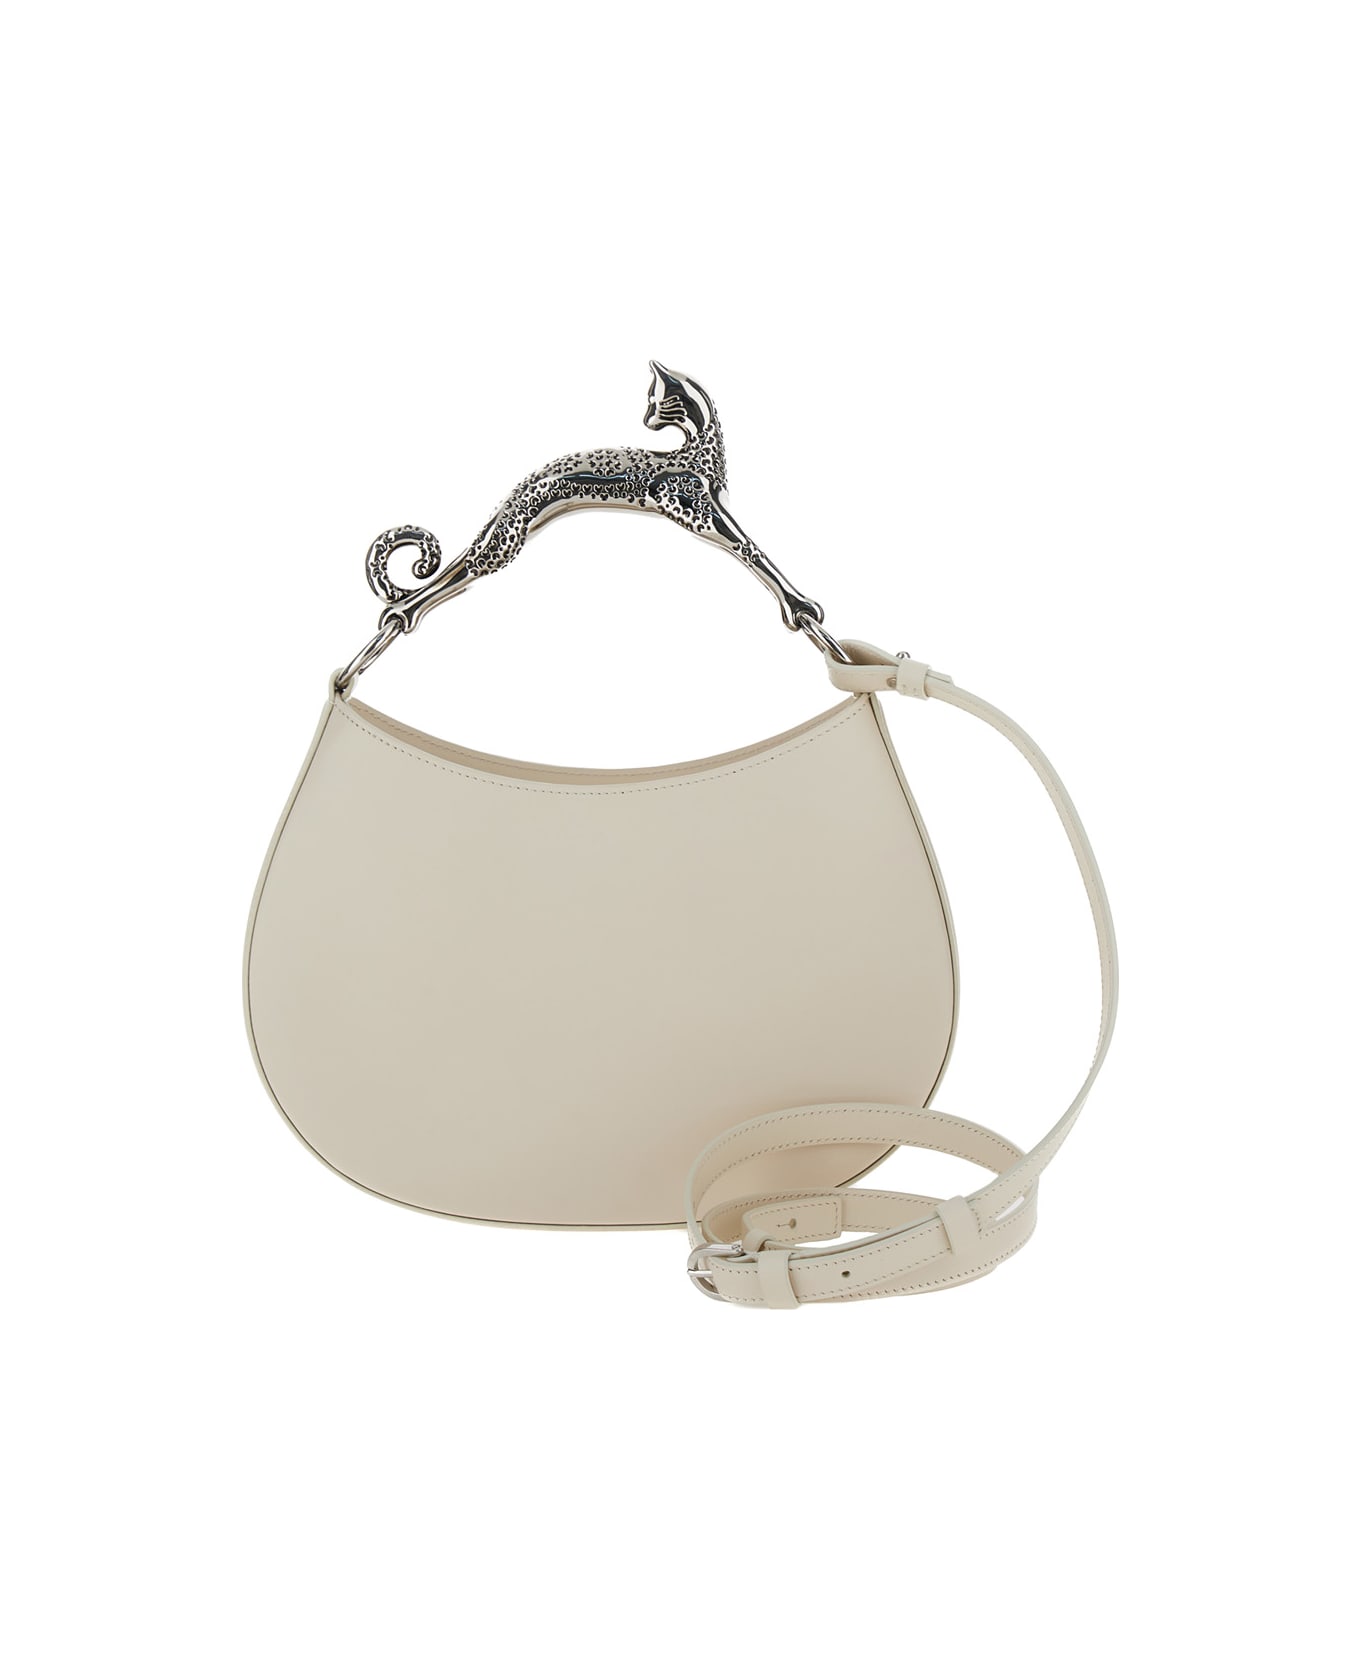 Lanvin Hobo Bag Pm With Cat Handle - White